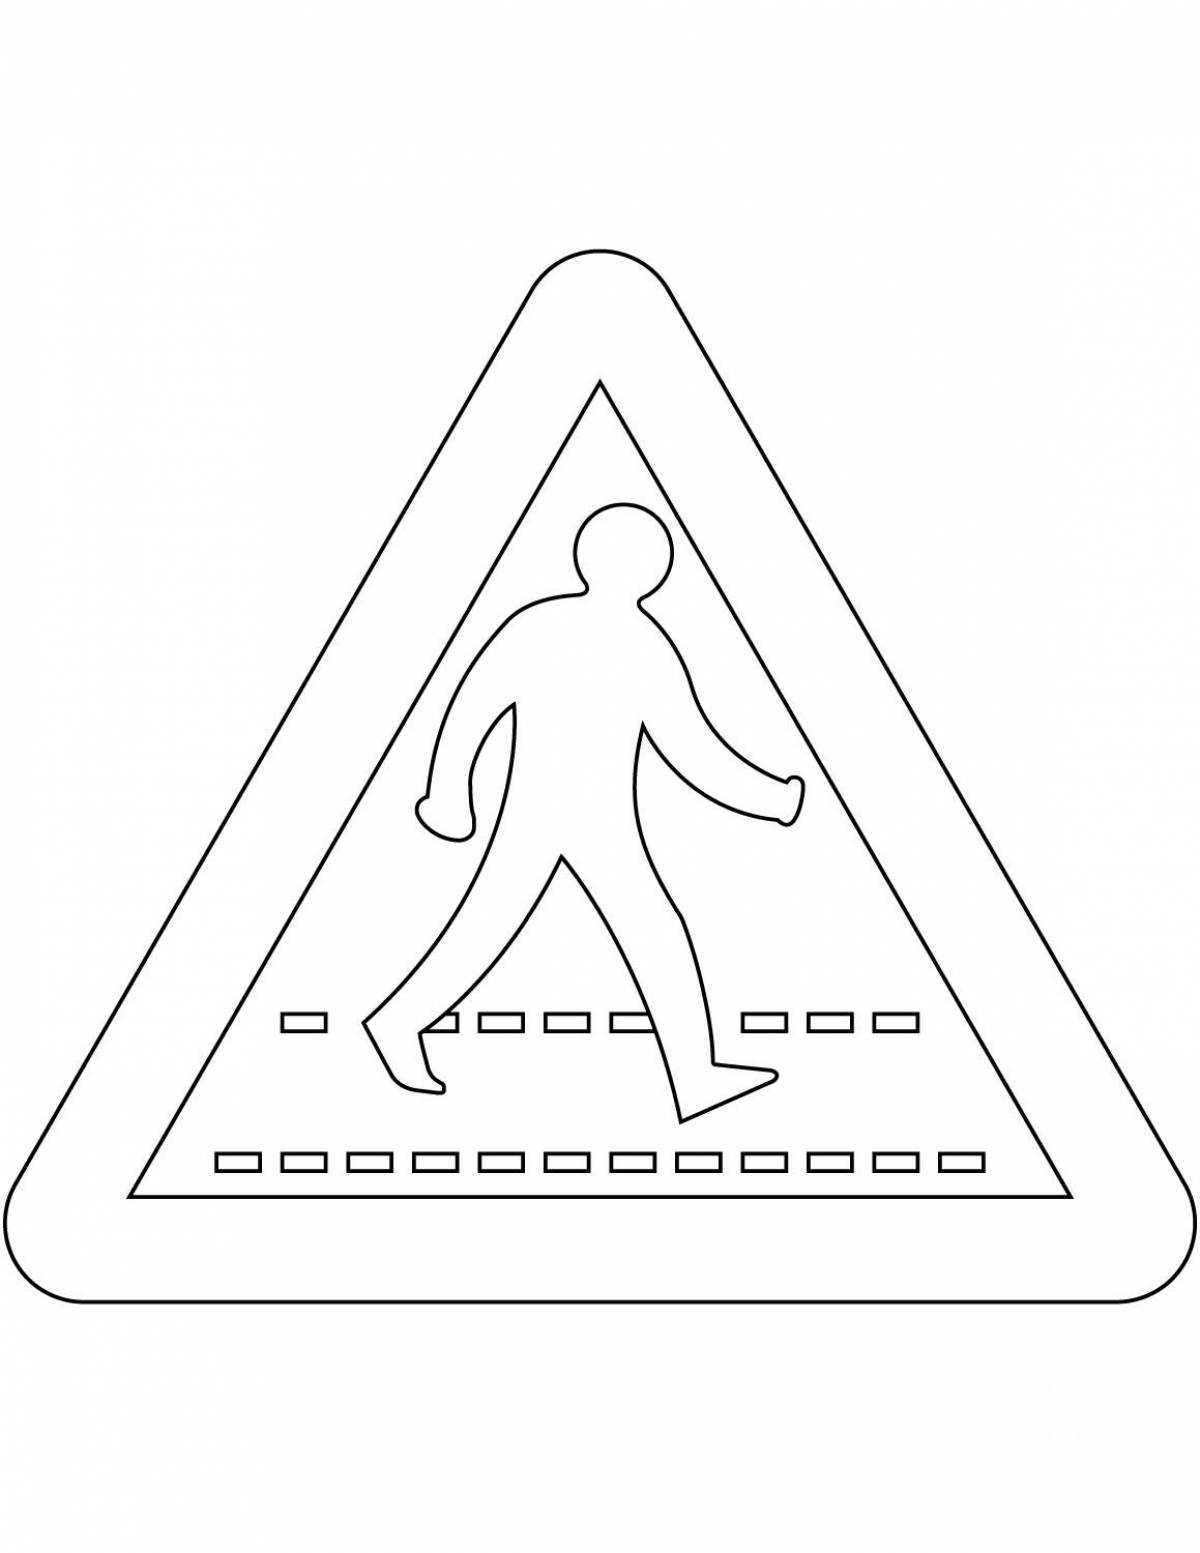 Coloring page cheerful crosswalk sign